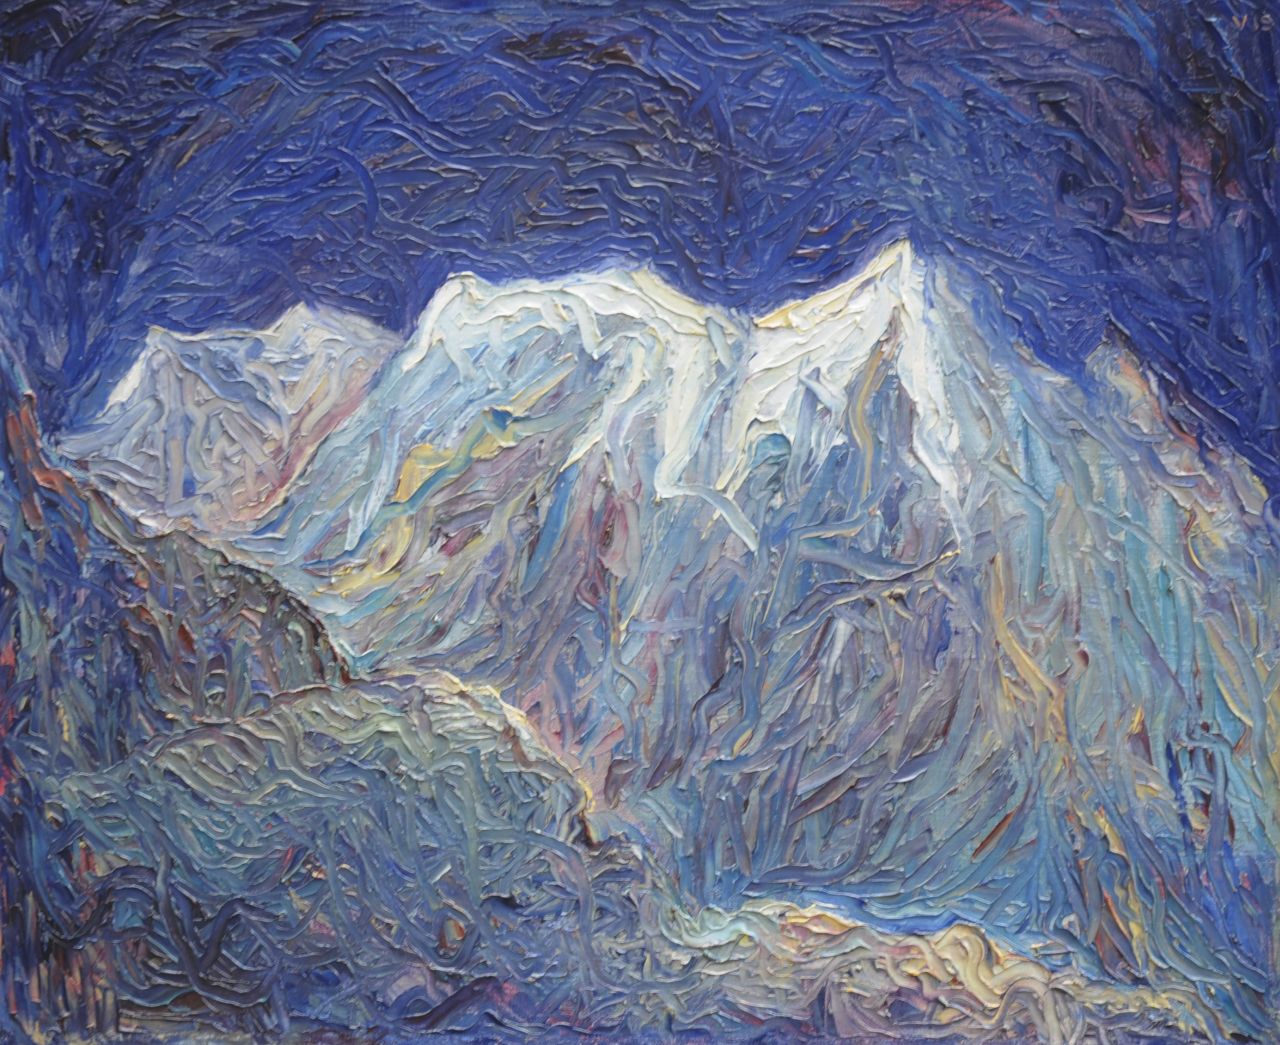 Vis D.  | Dirk Vis, Mountains, oil on canvas 50.1 x 60.2 cm, signed u.r. and on the reverse